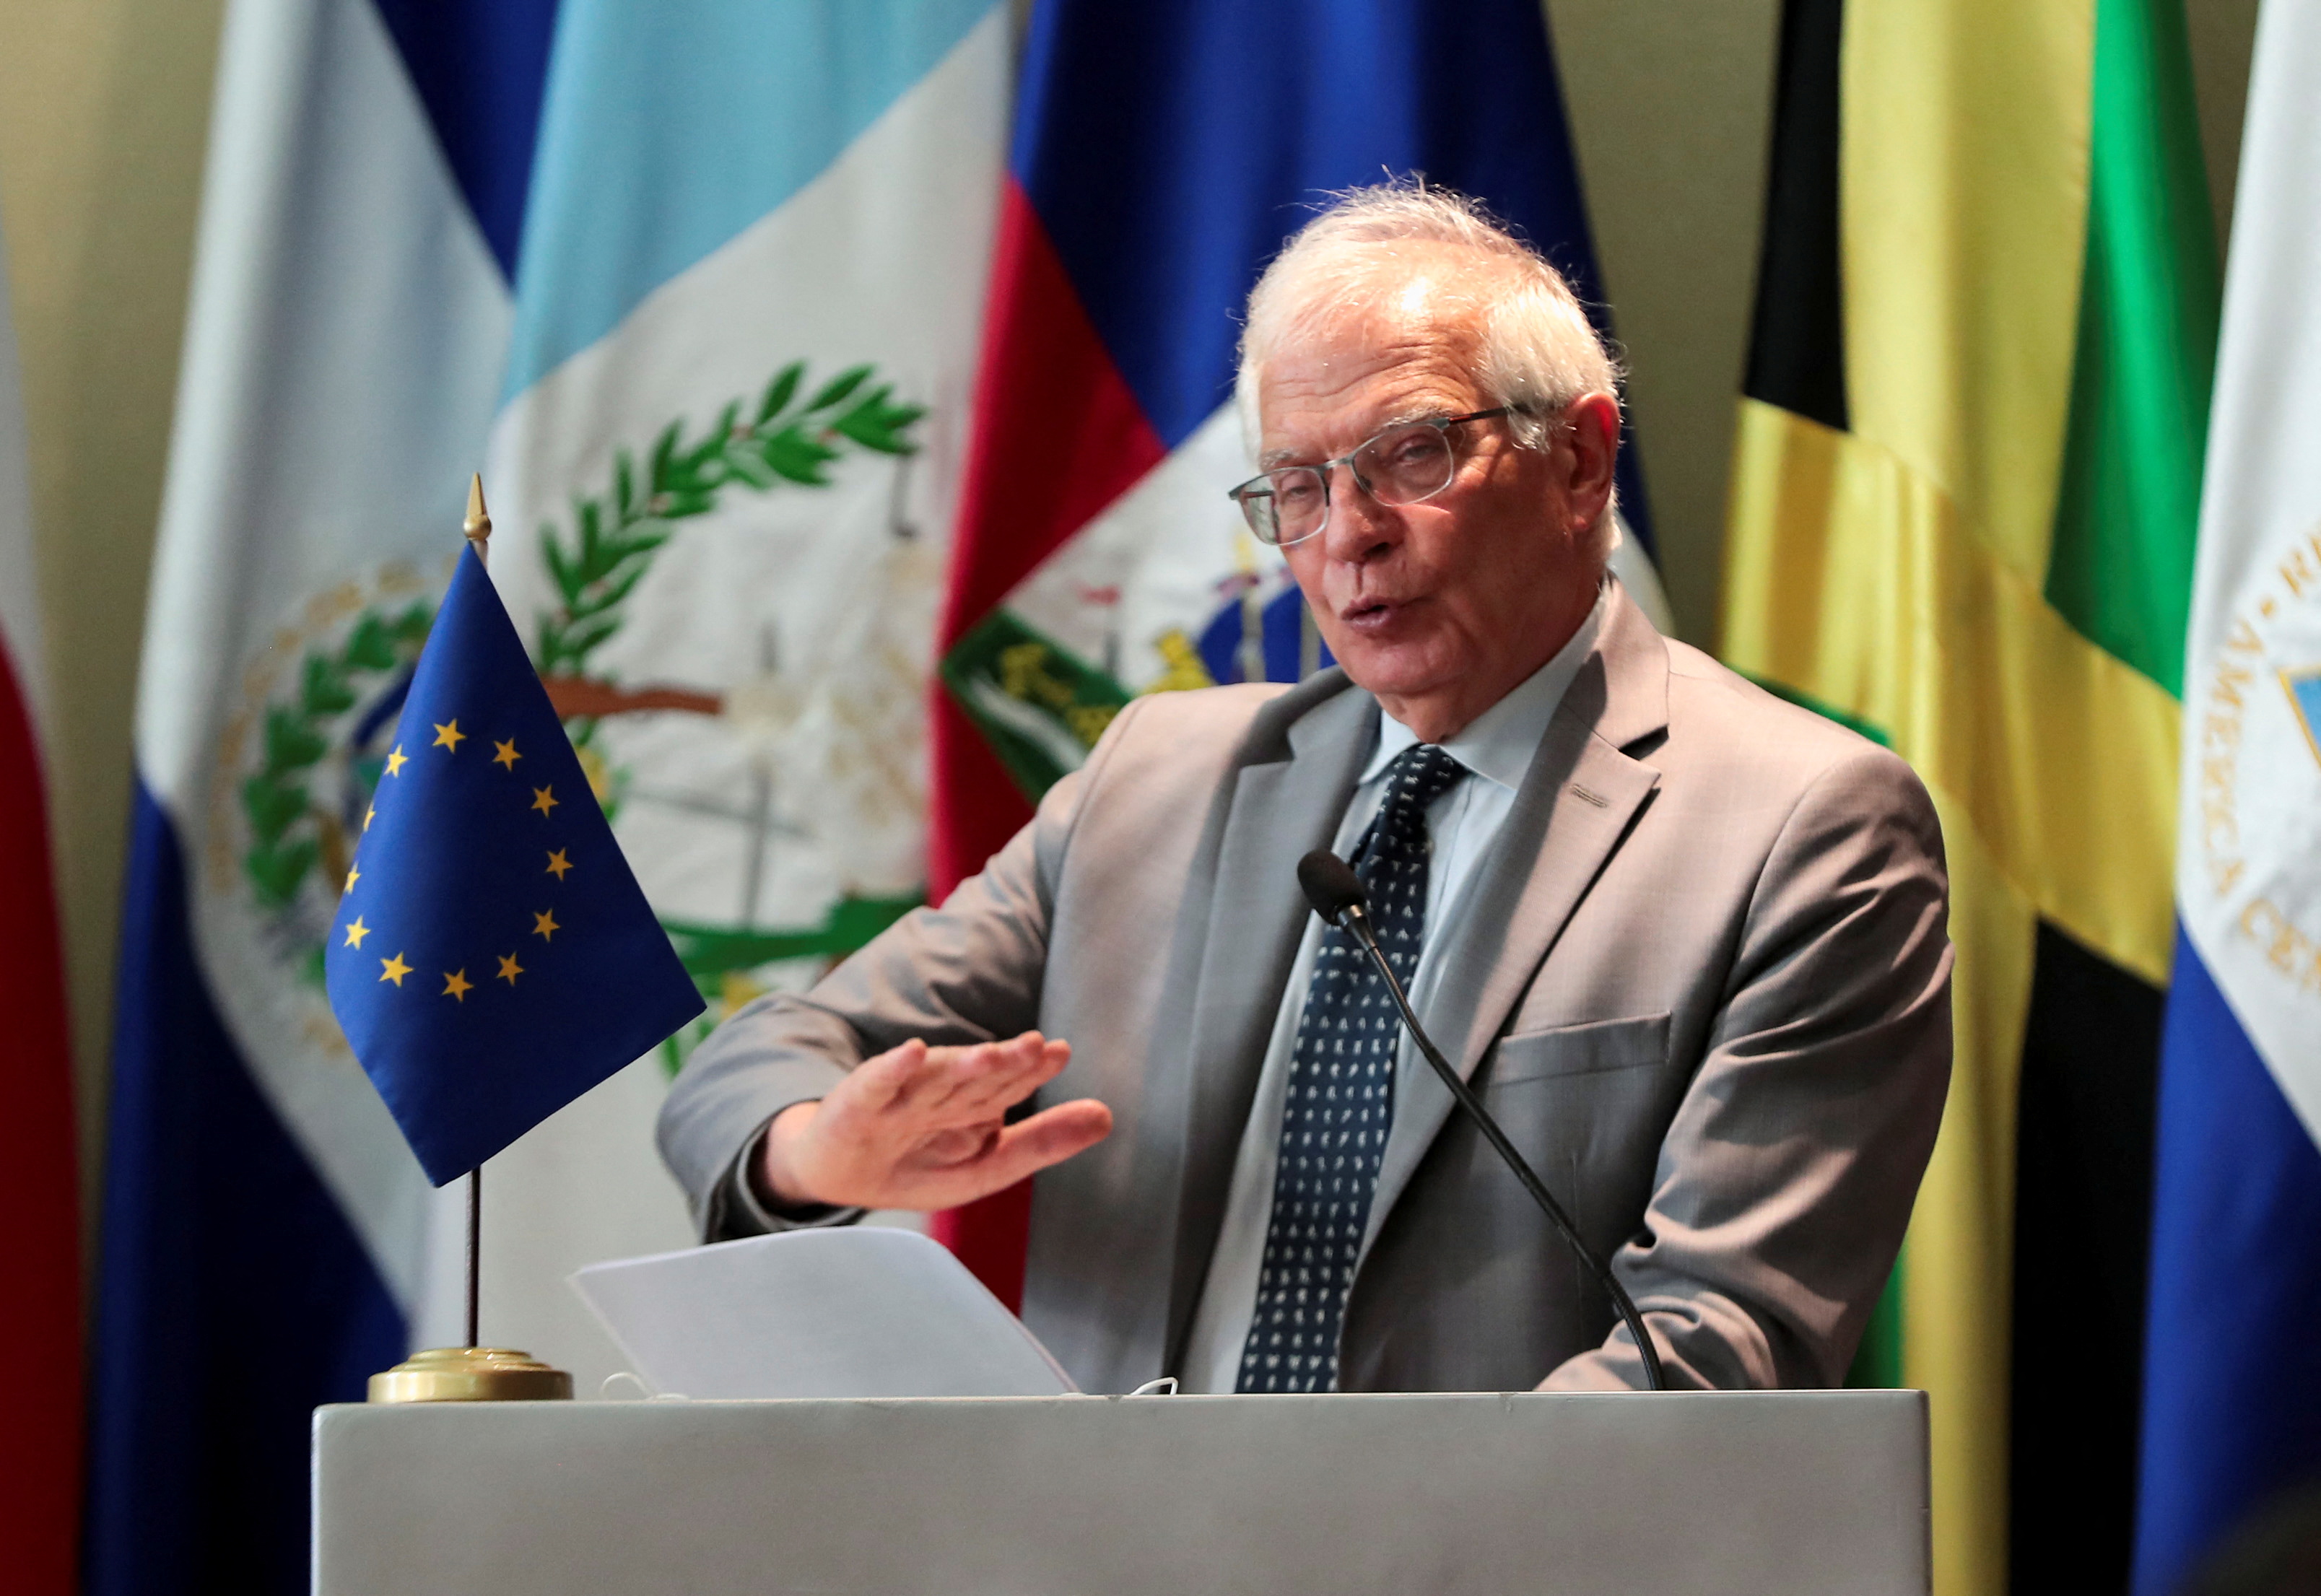 High Representative of the European Union for Foreign Affairs and Security Policy Josep Borrell speaks during a news conference in Panama City